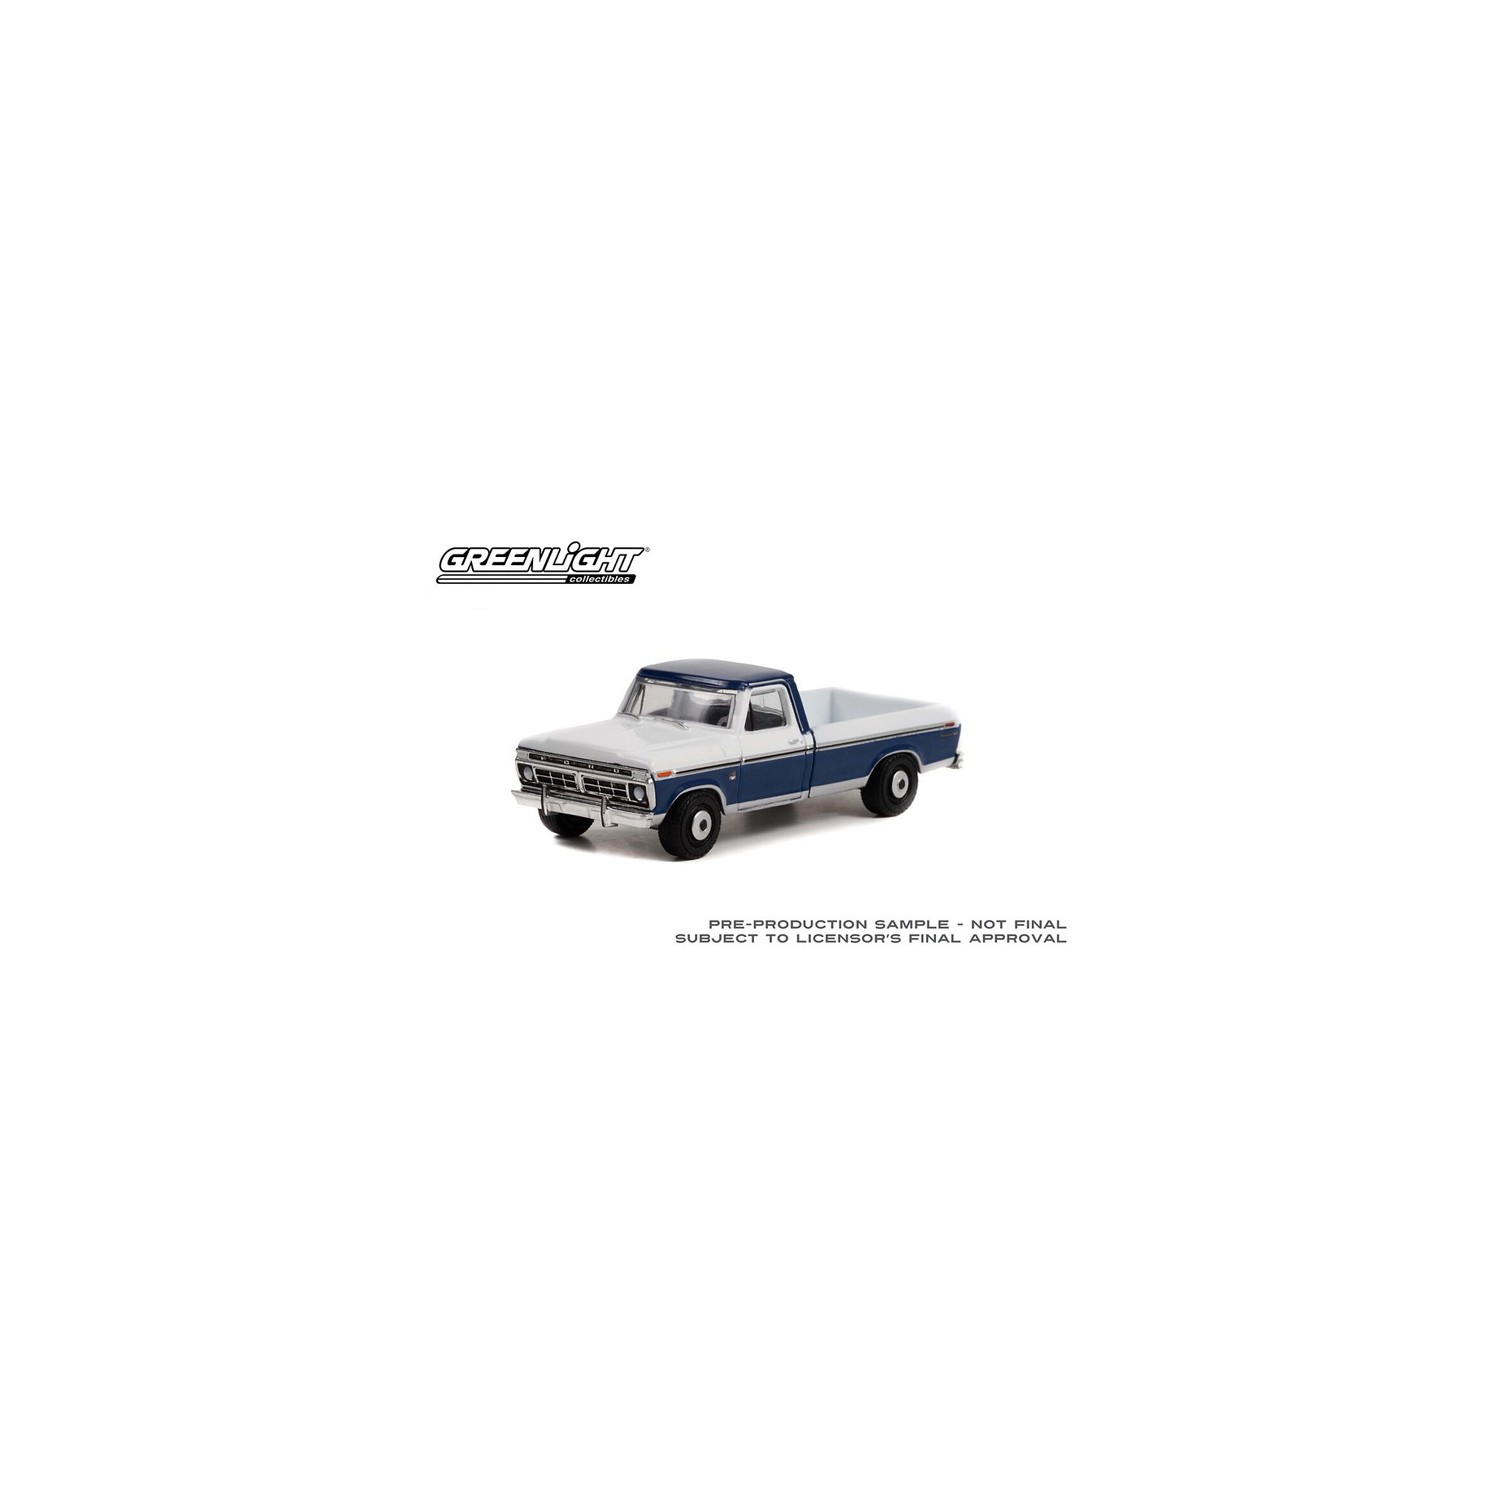 Greenlight Anniversary Collection - 1976 Ford F-150 Ranger XLT Truck